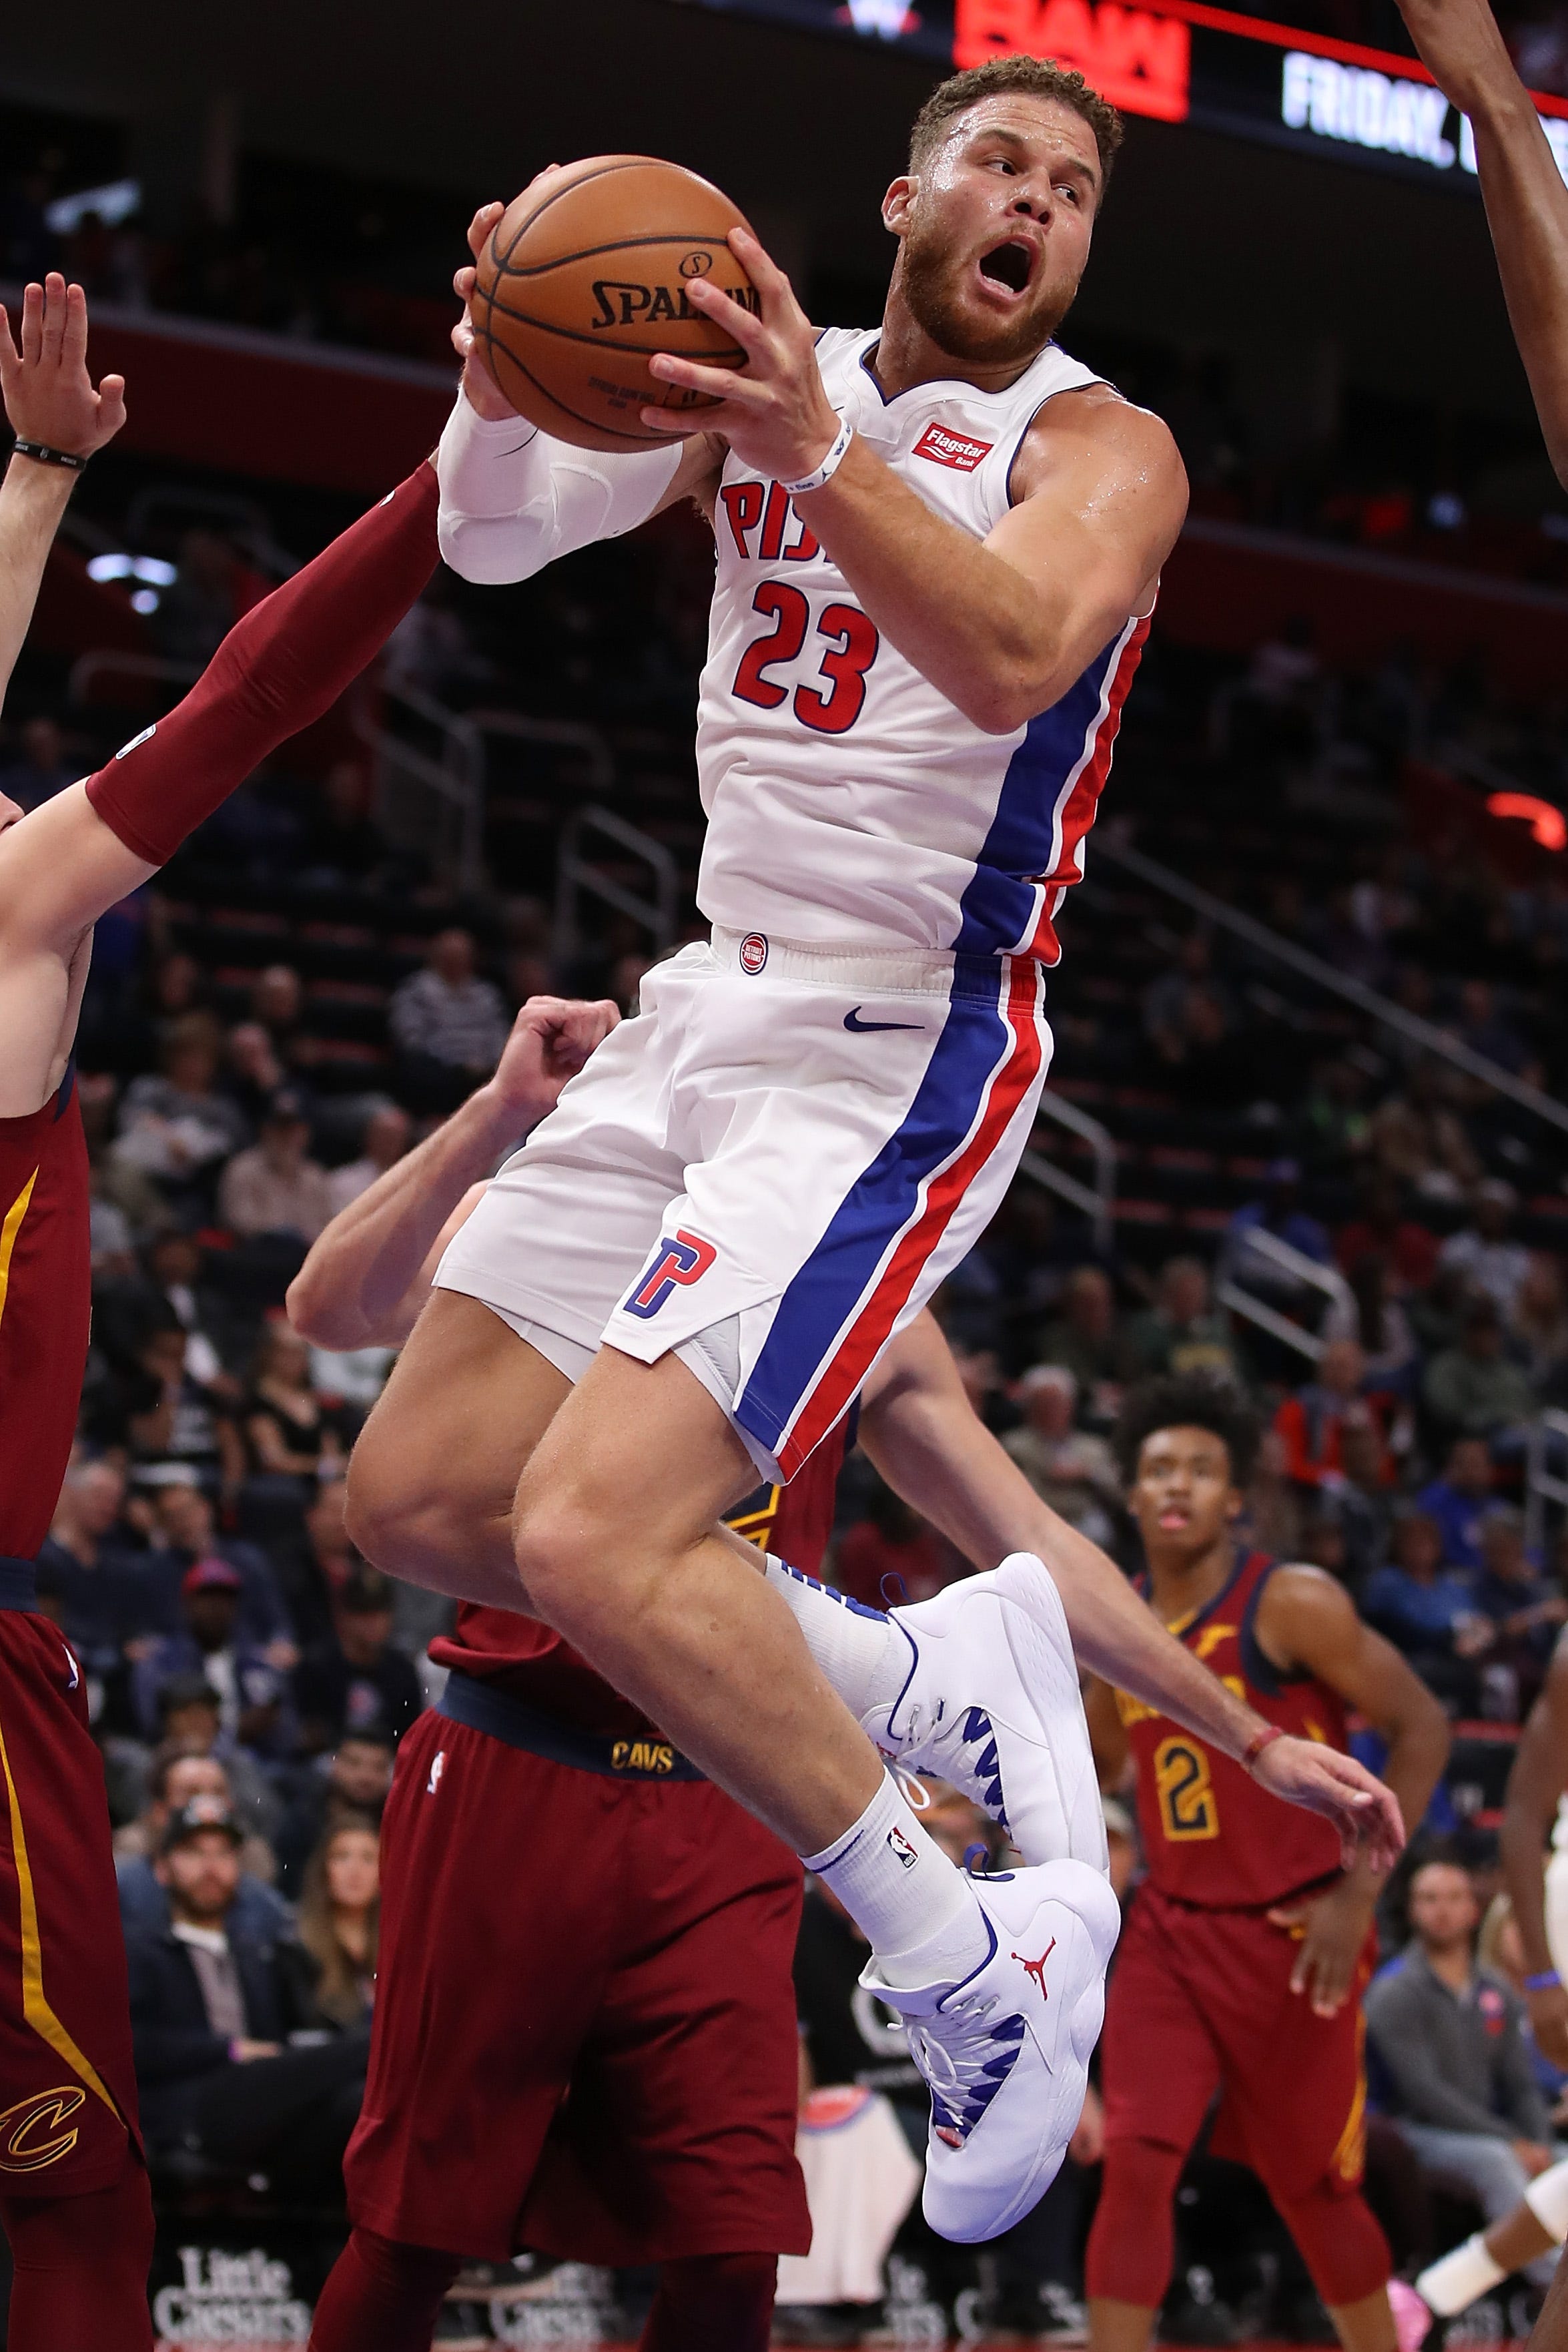 Blake Griffin (23) of the Detroit Pistons looks for a open teammate while playing the Cleveland Cavaliers during the second half.